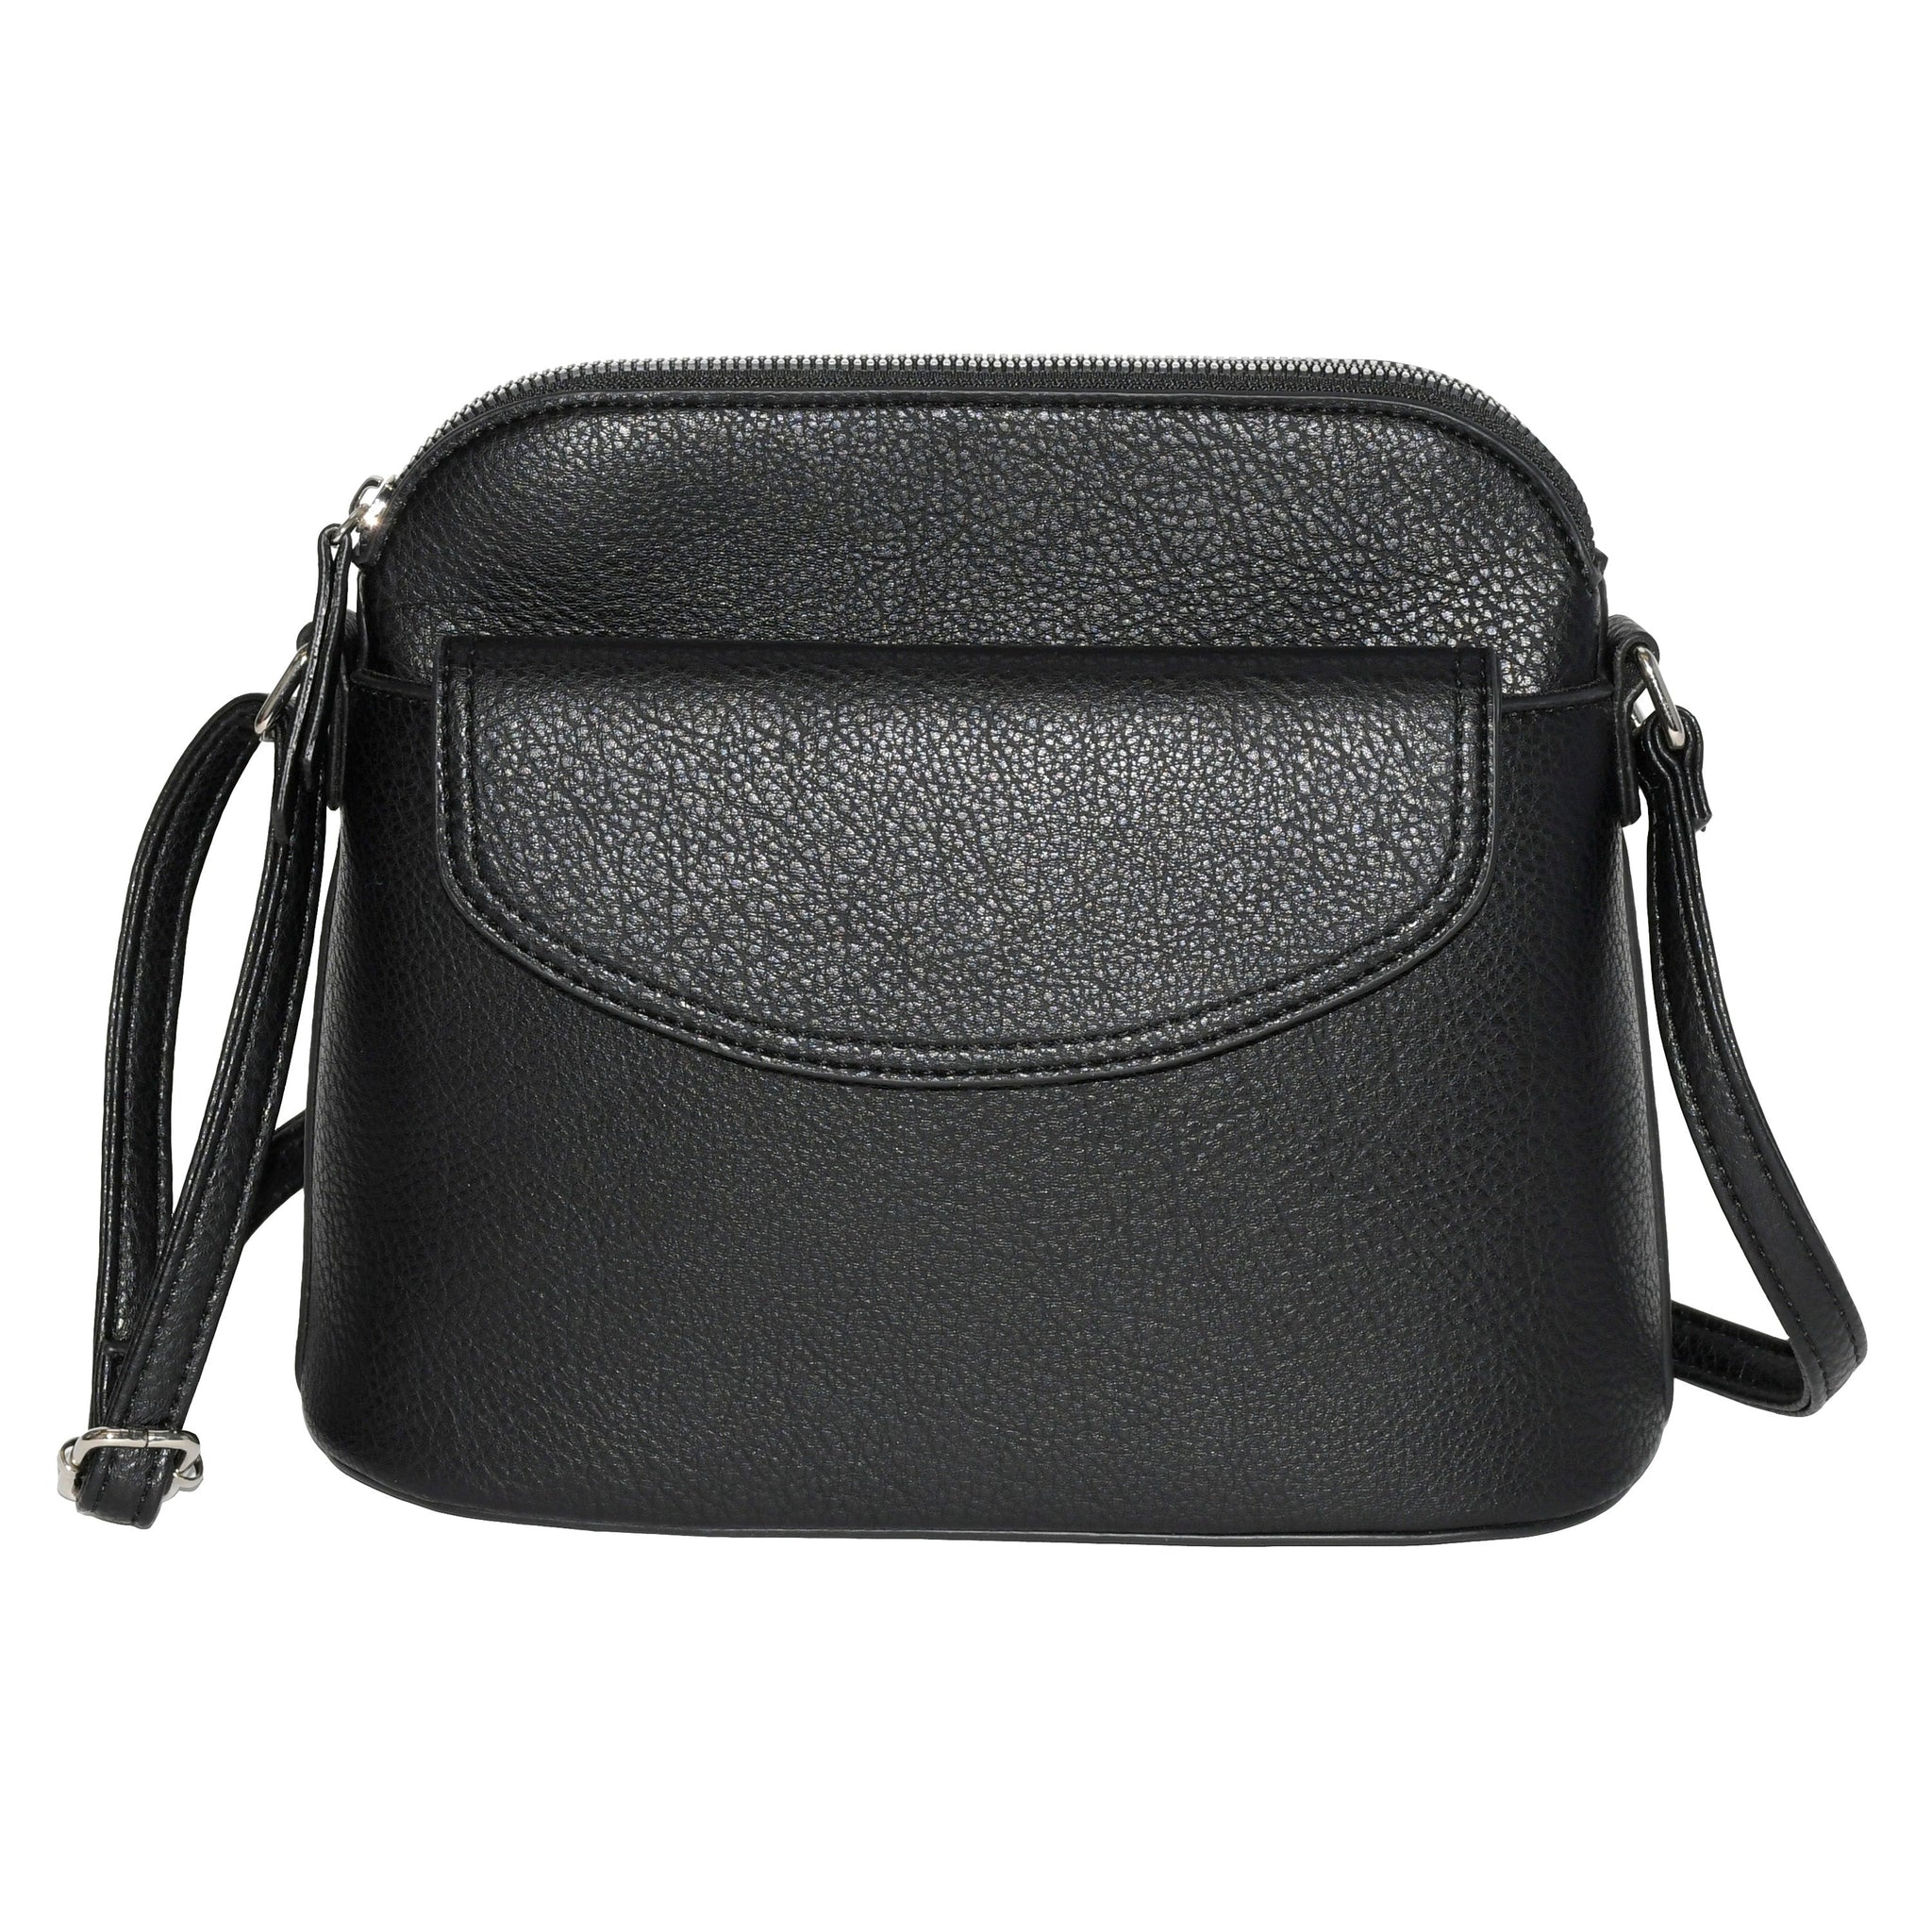 Ladies' Crossbody Bag with Front Flap